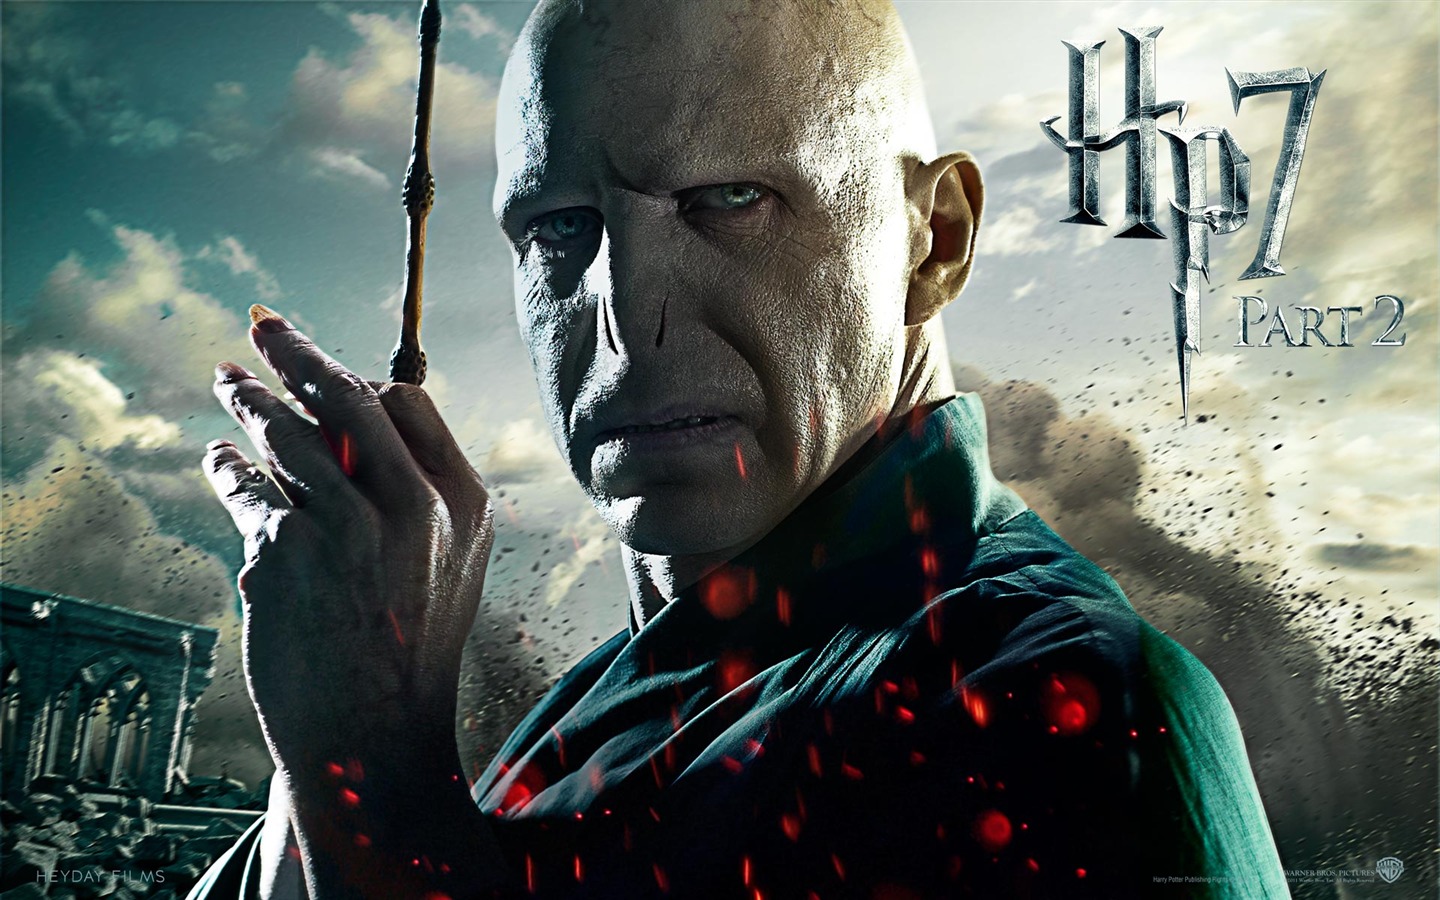 2011 Harry Potter and the Deathly Hallows HD wallpapers #16 - 1440x900